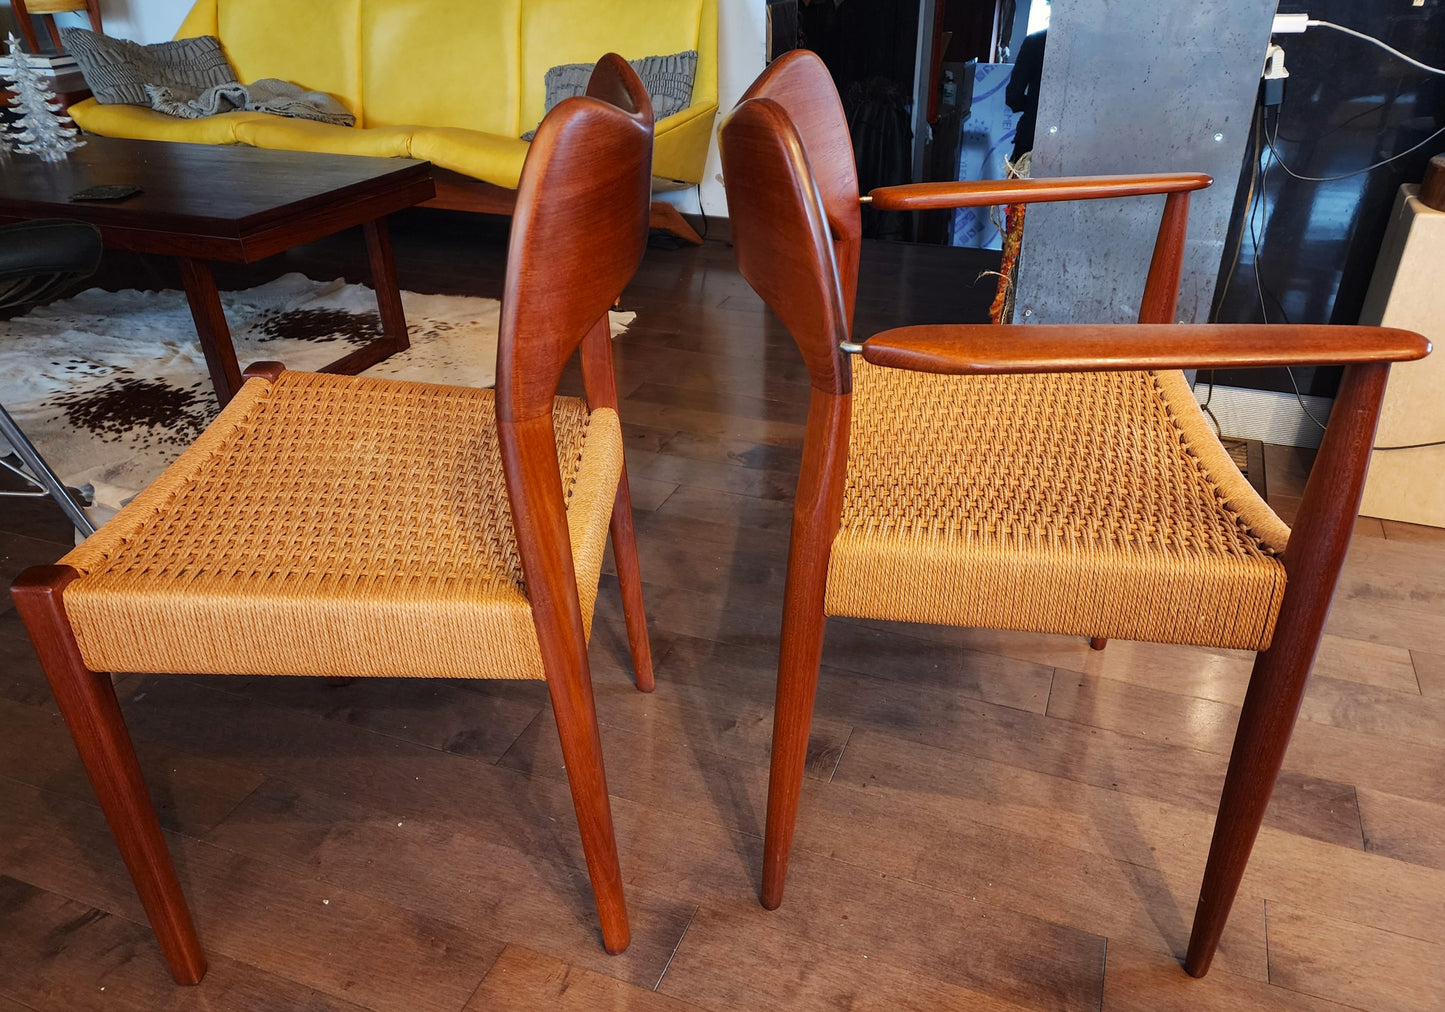 6 RESTORED Danish Mid Century Modern Teak & Papercord Chairs by A.H. Olsen for M.Kold